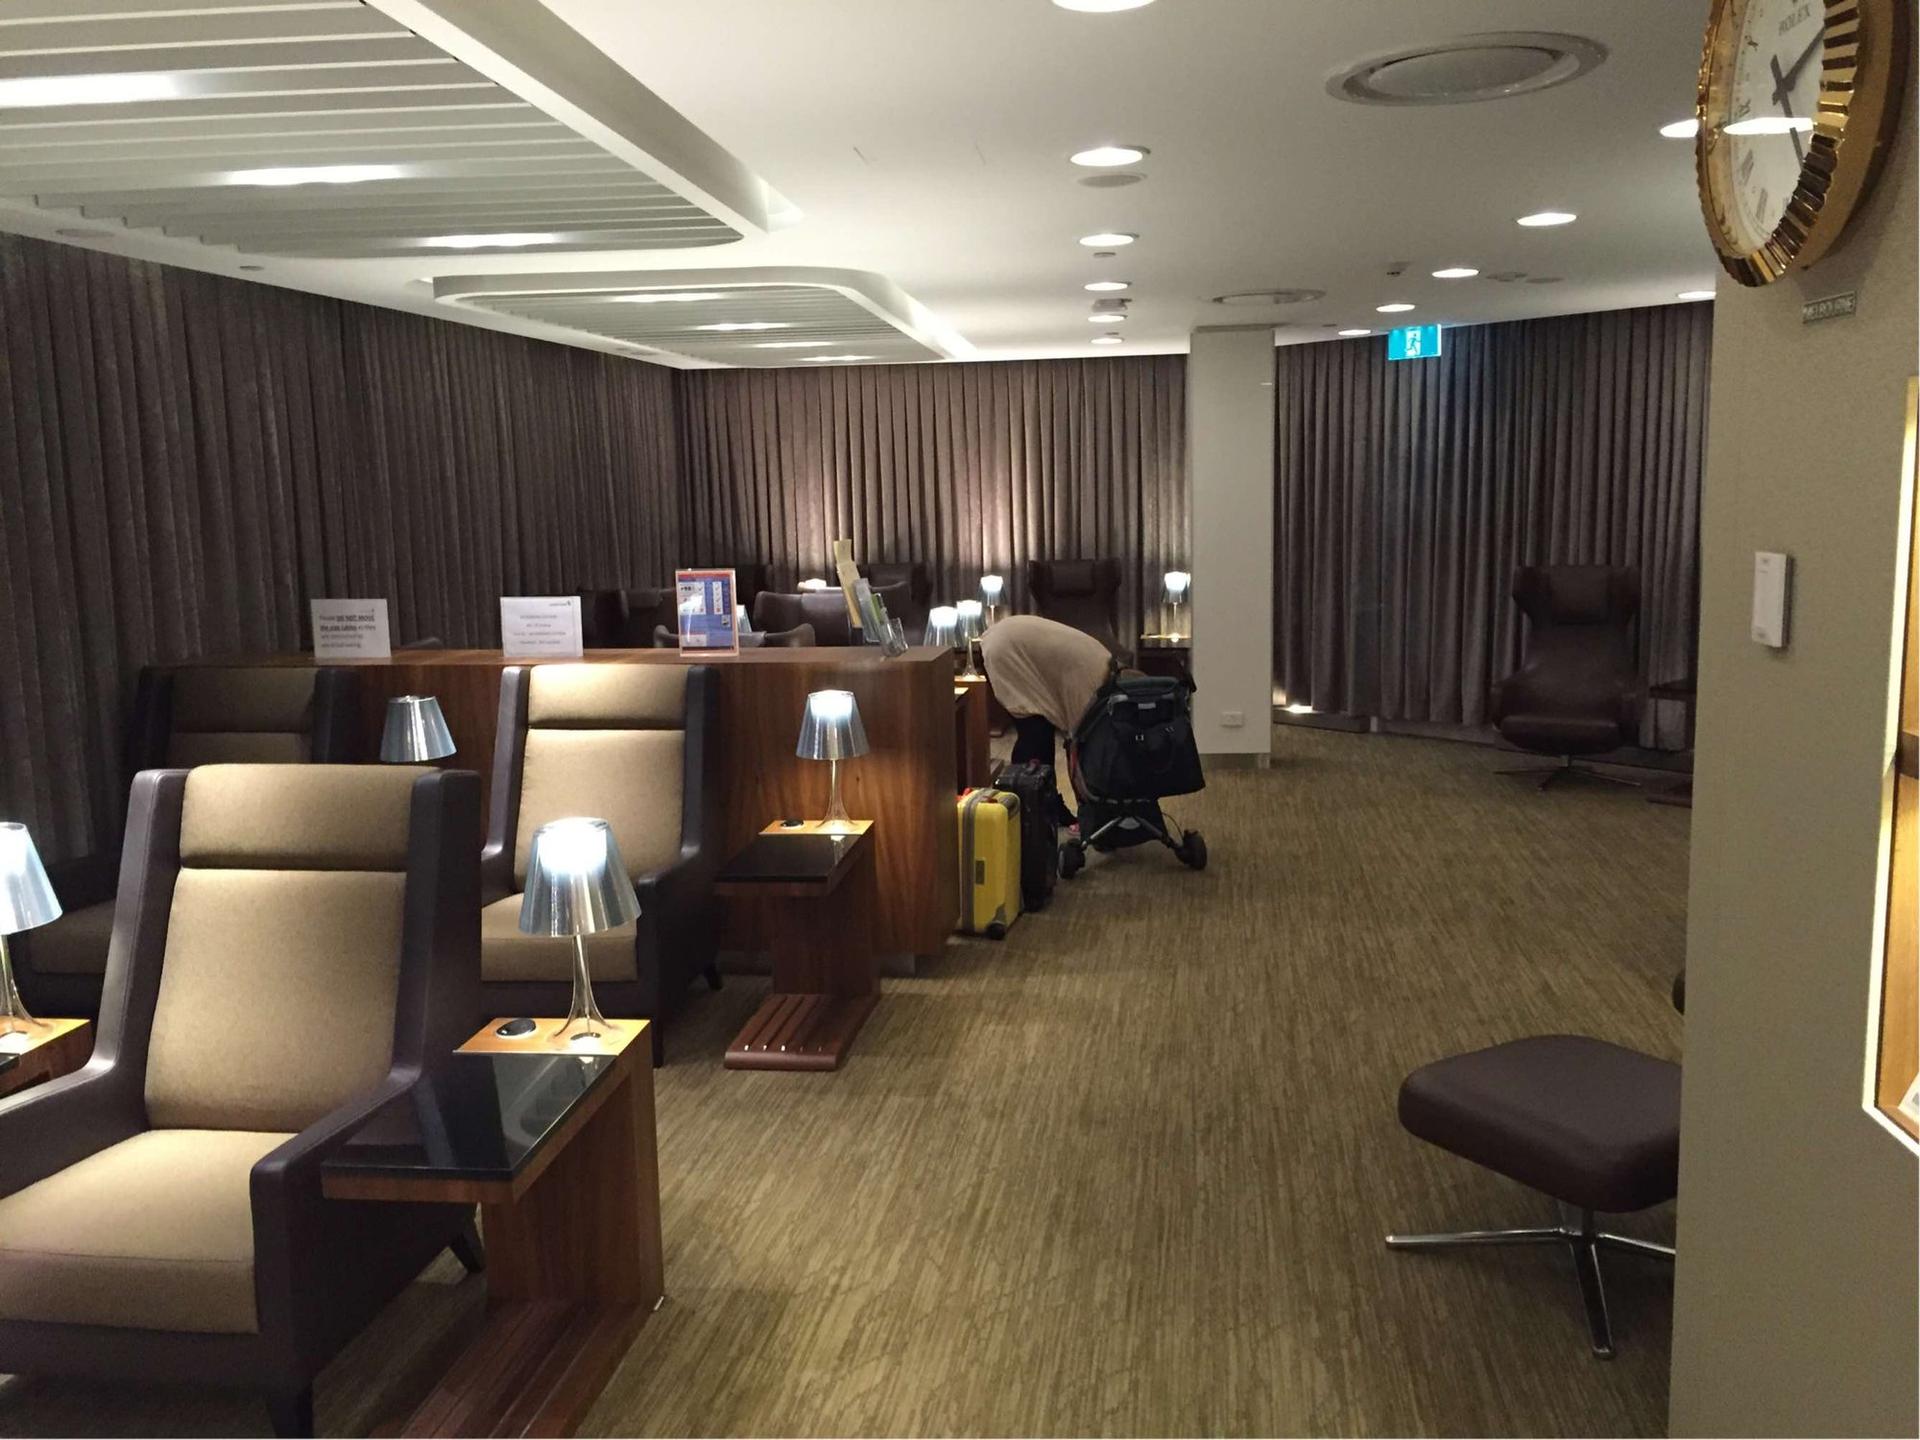 Singapore Airlines SilverKris First Class Lounge image 6 of 7